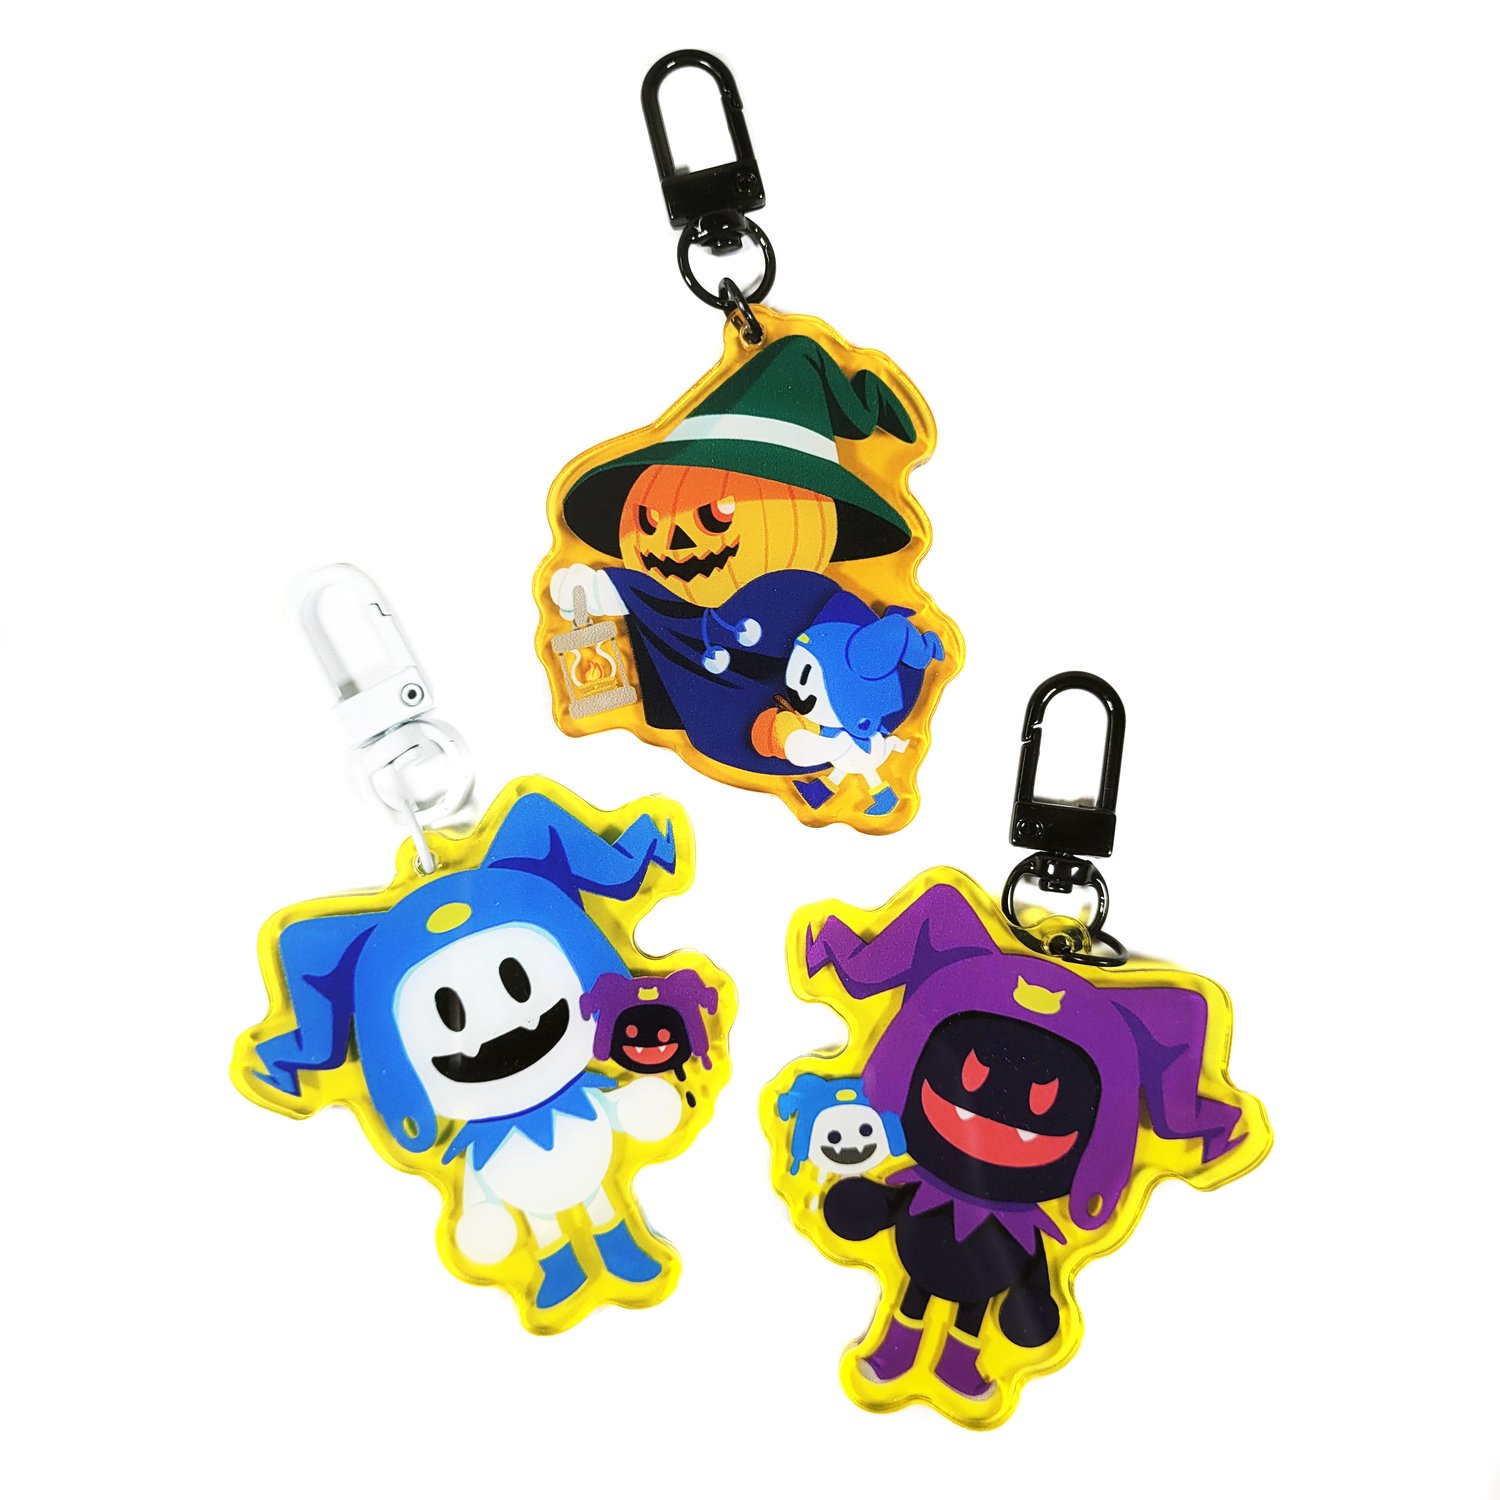 Image of Hee-ho Keychains